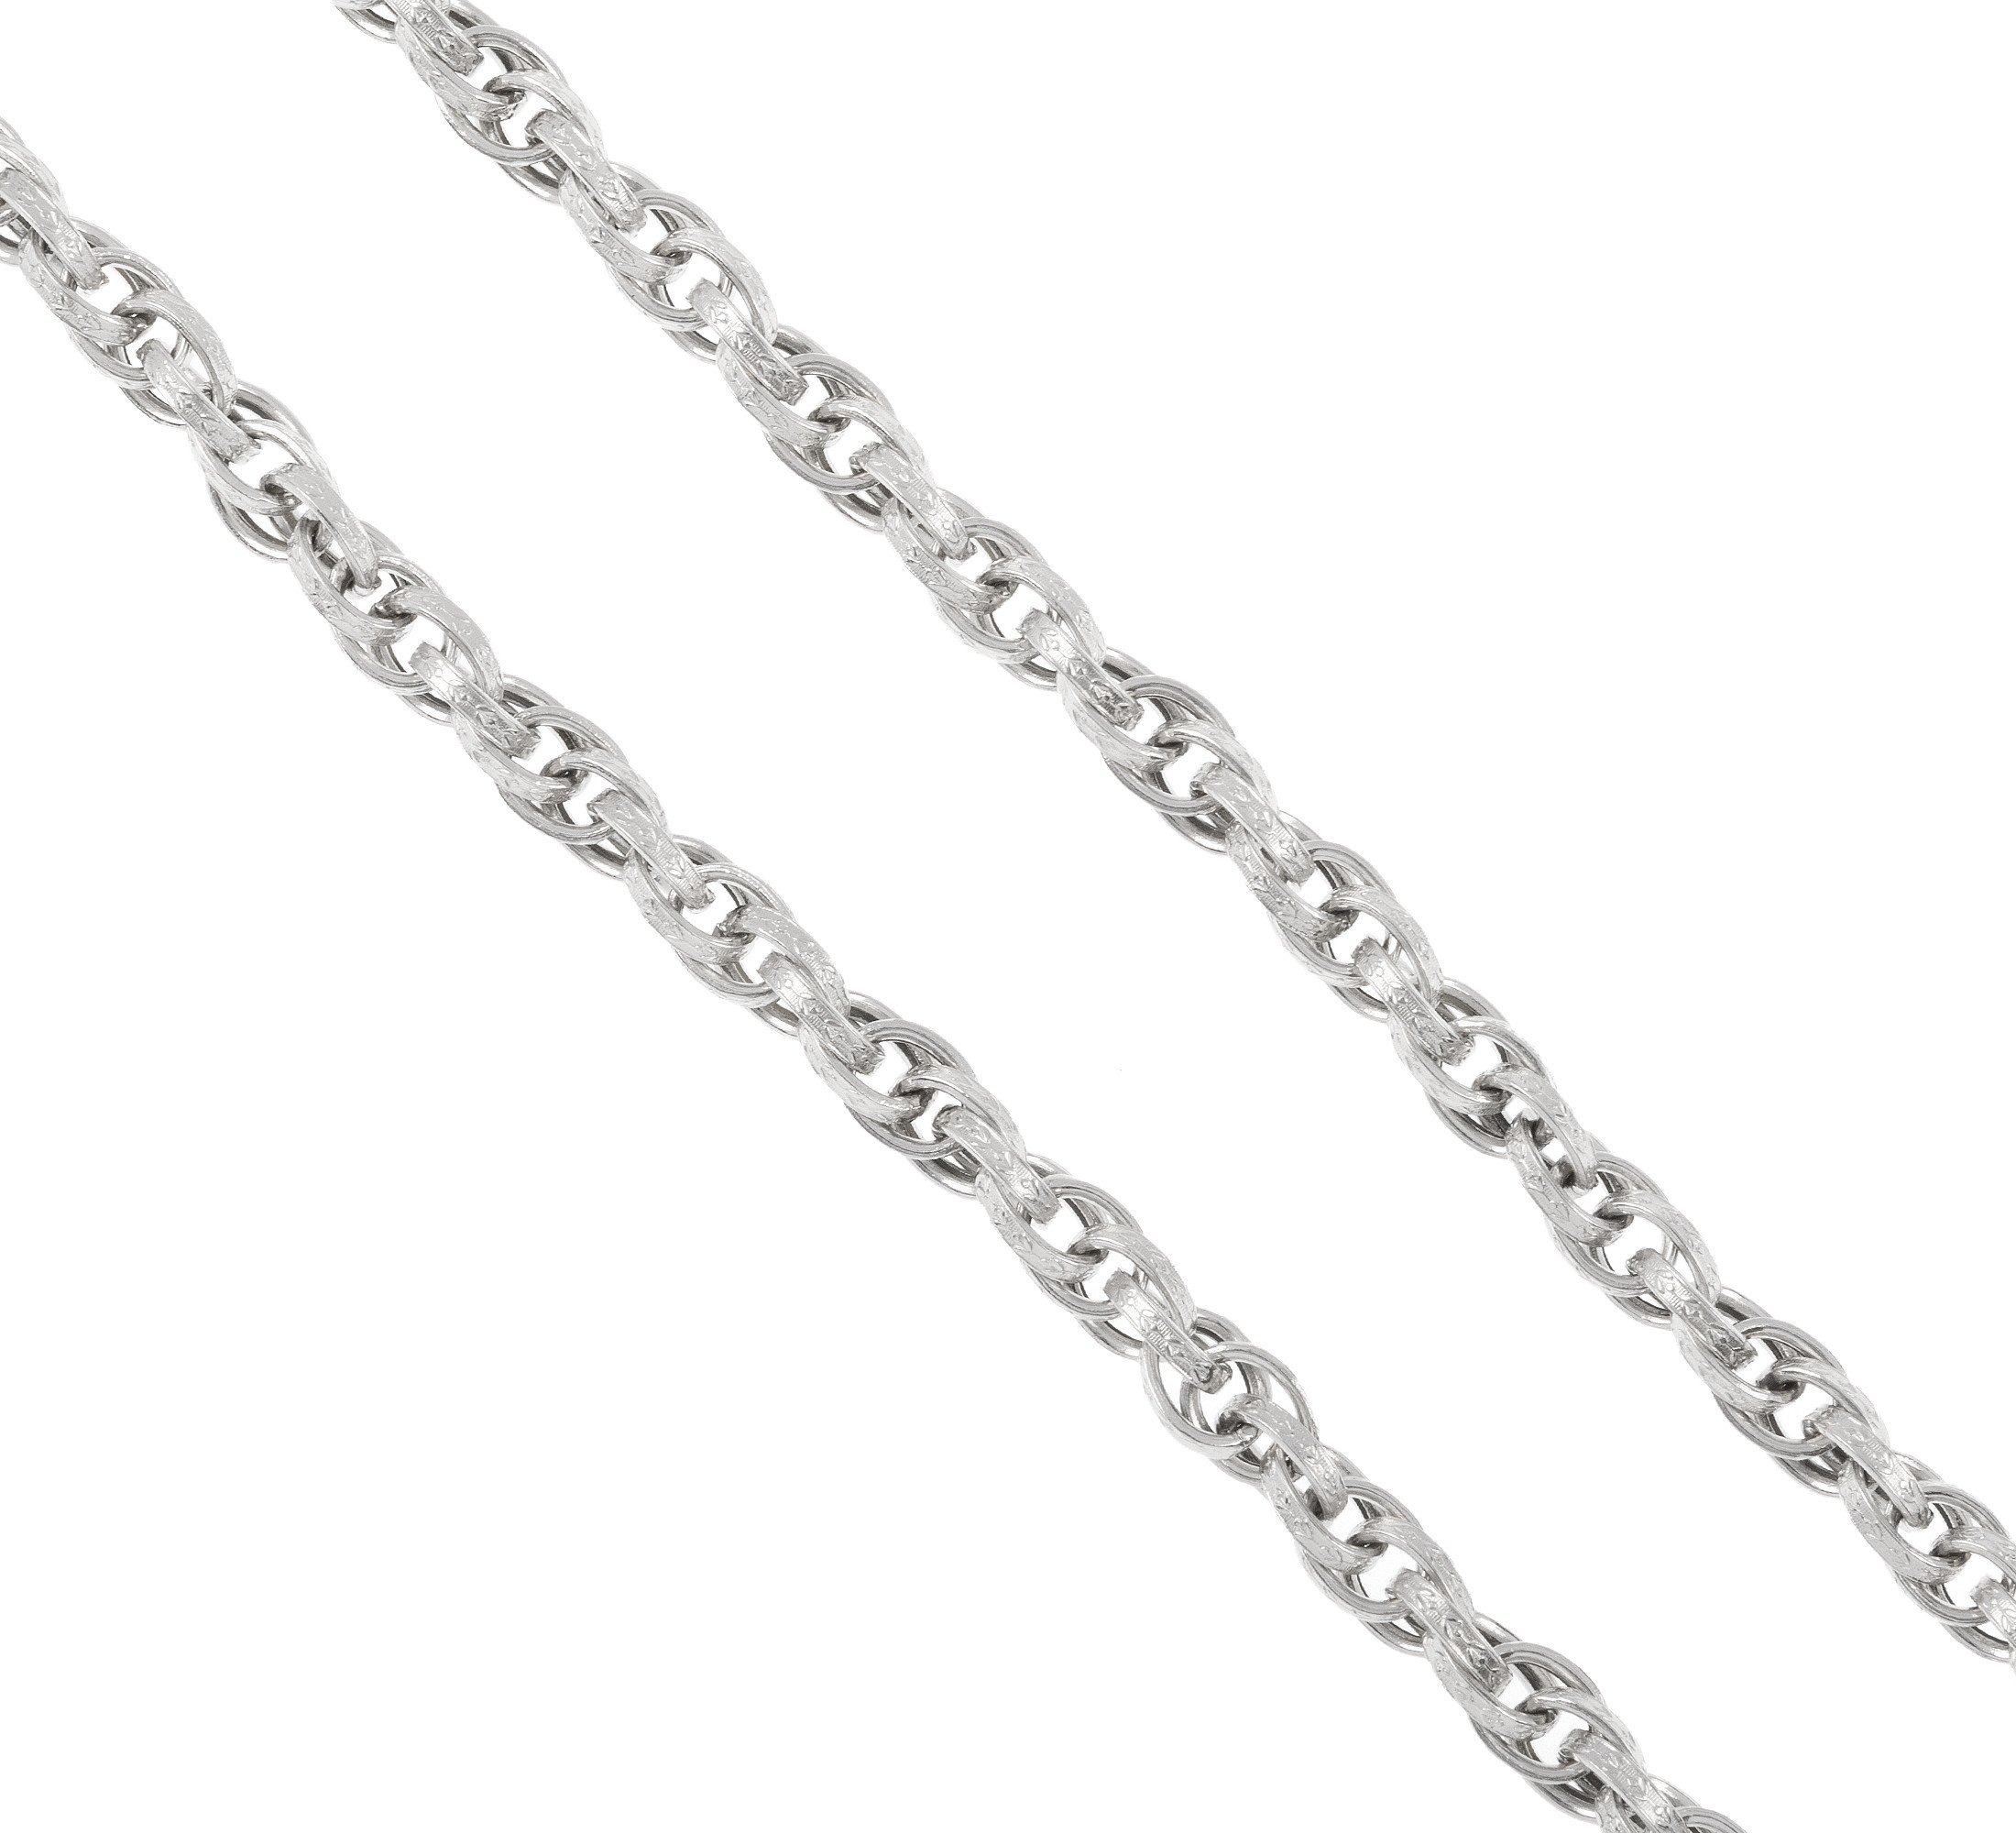 Men's White Gold 5.6mm Prince of Wales Chain | Buy Online | Free ...